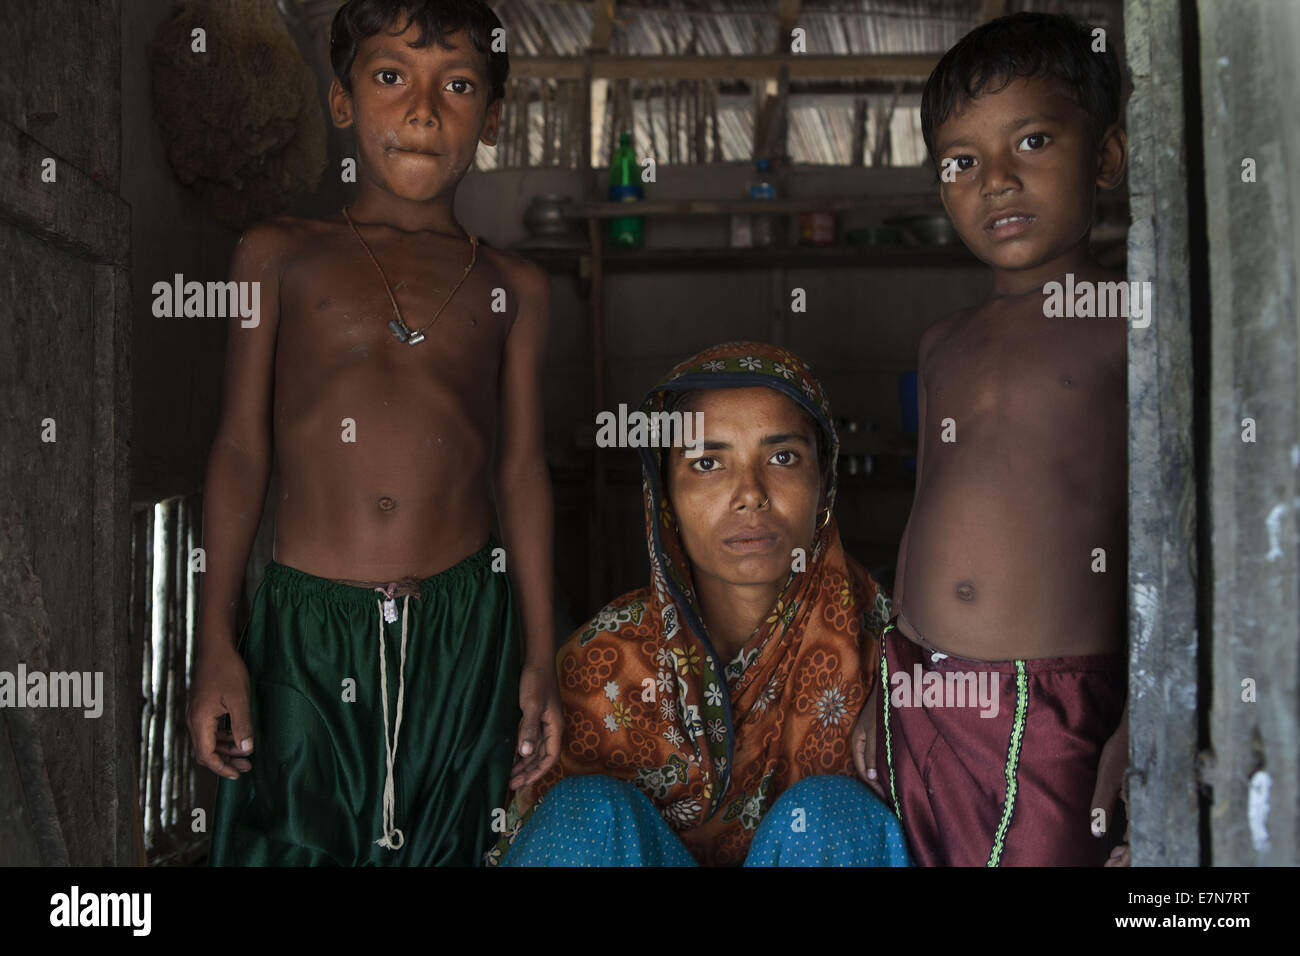 Oct. 18, 2012 - Hosneara (23) with her two sons, her husband Habibur Rahman (28) was killed by Tiger in the year 2009. Thousands of men and women go into the Sundarbans forest in Southern Bangladesh every day to gather honey, collect firewood, or catch fish, crabs and putting themselves at great risk for a tiger attack. In almost every village there is a woman or man, commonly the women are referred to as a 'Bagh Bidhoba'' that is ''Tiger Widow'', whose spouse has been a victim of a tiger attack. The men usually re-marry within a few months, but the women do not. As most women are wed when Stock Photo